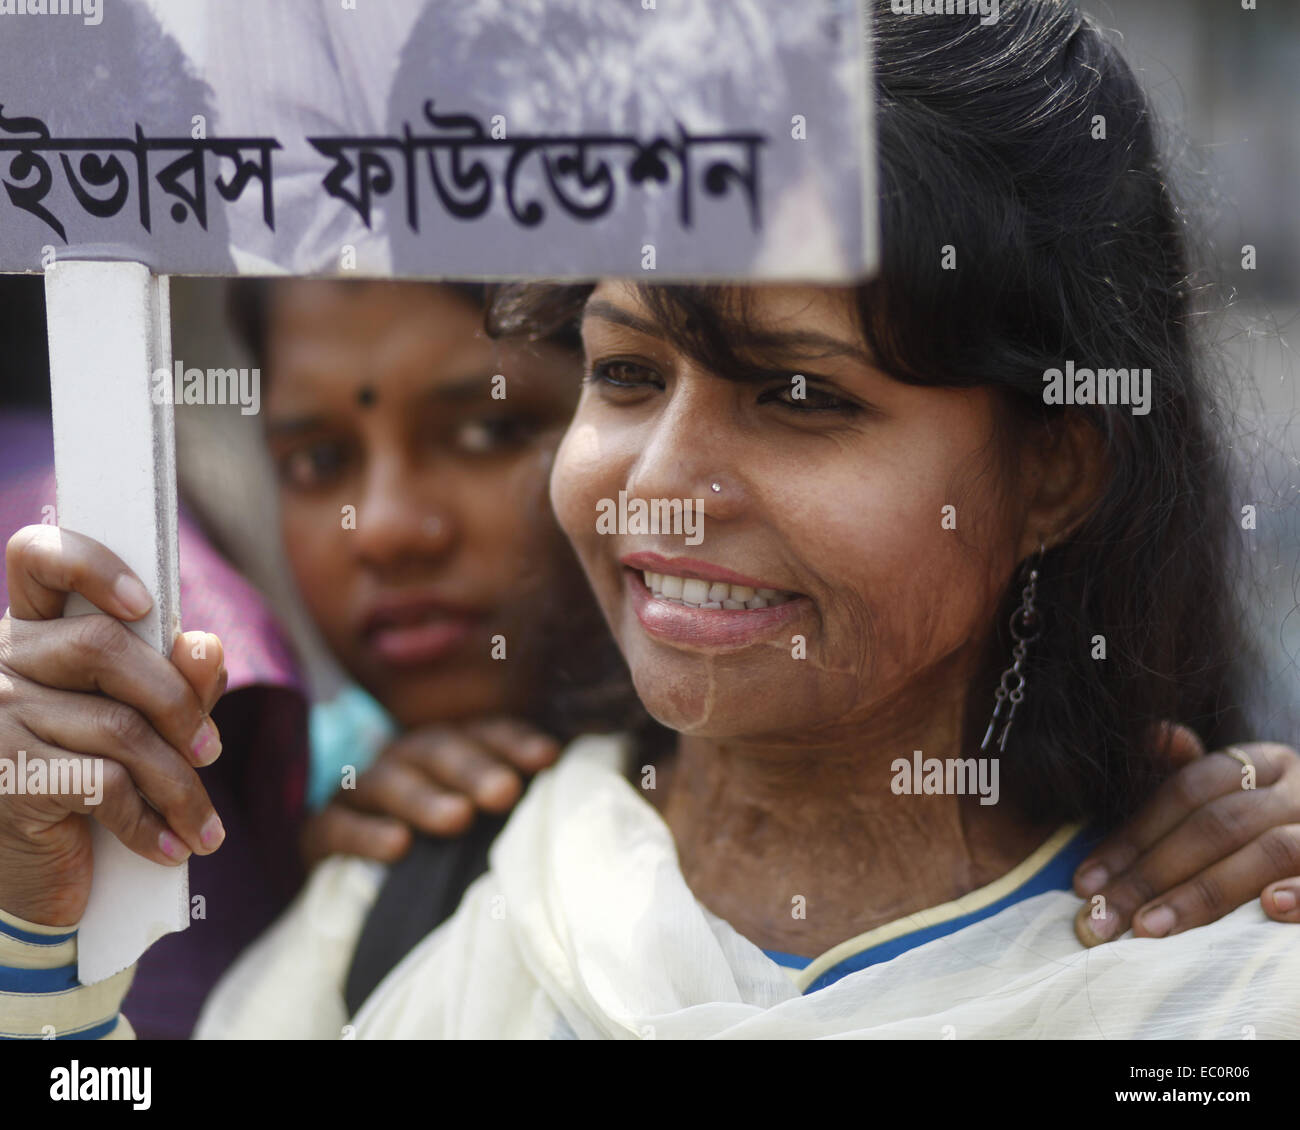 Dhaka, Bangladesh. 7th Mar, 2014. Dhaka, Bangladesh, 07th March 2014:.Survivors of acid attacks, attend a human chain to protest against acid violence on the eve of the International Women's Day celebration in Dhaka, Bangladesh. According to Acid Survivors Foundation (ASF), there had been 3,184 acid attacks since February 1999 to February 2014 in Bangladesh, where 1,792 women were victims among a total of 3,512. Acid attacks are mostly common in Cambodia, Pakistan, Afganistan, India, Bangladesh and nearby other countries. It is estimated that some 80 percent of the victims of acid attacks ar Stock Photo